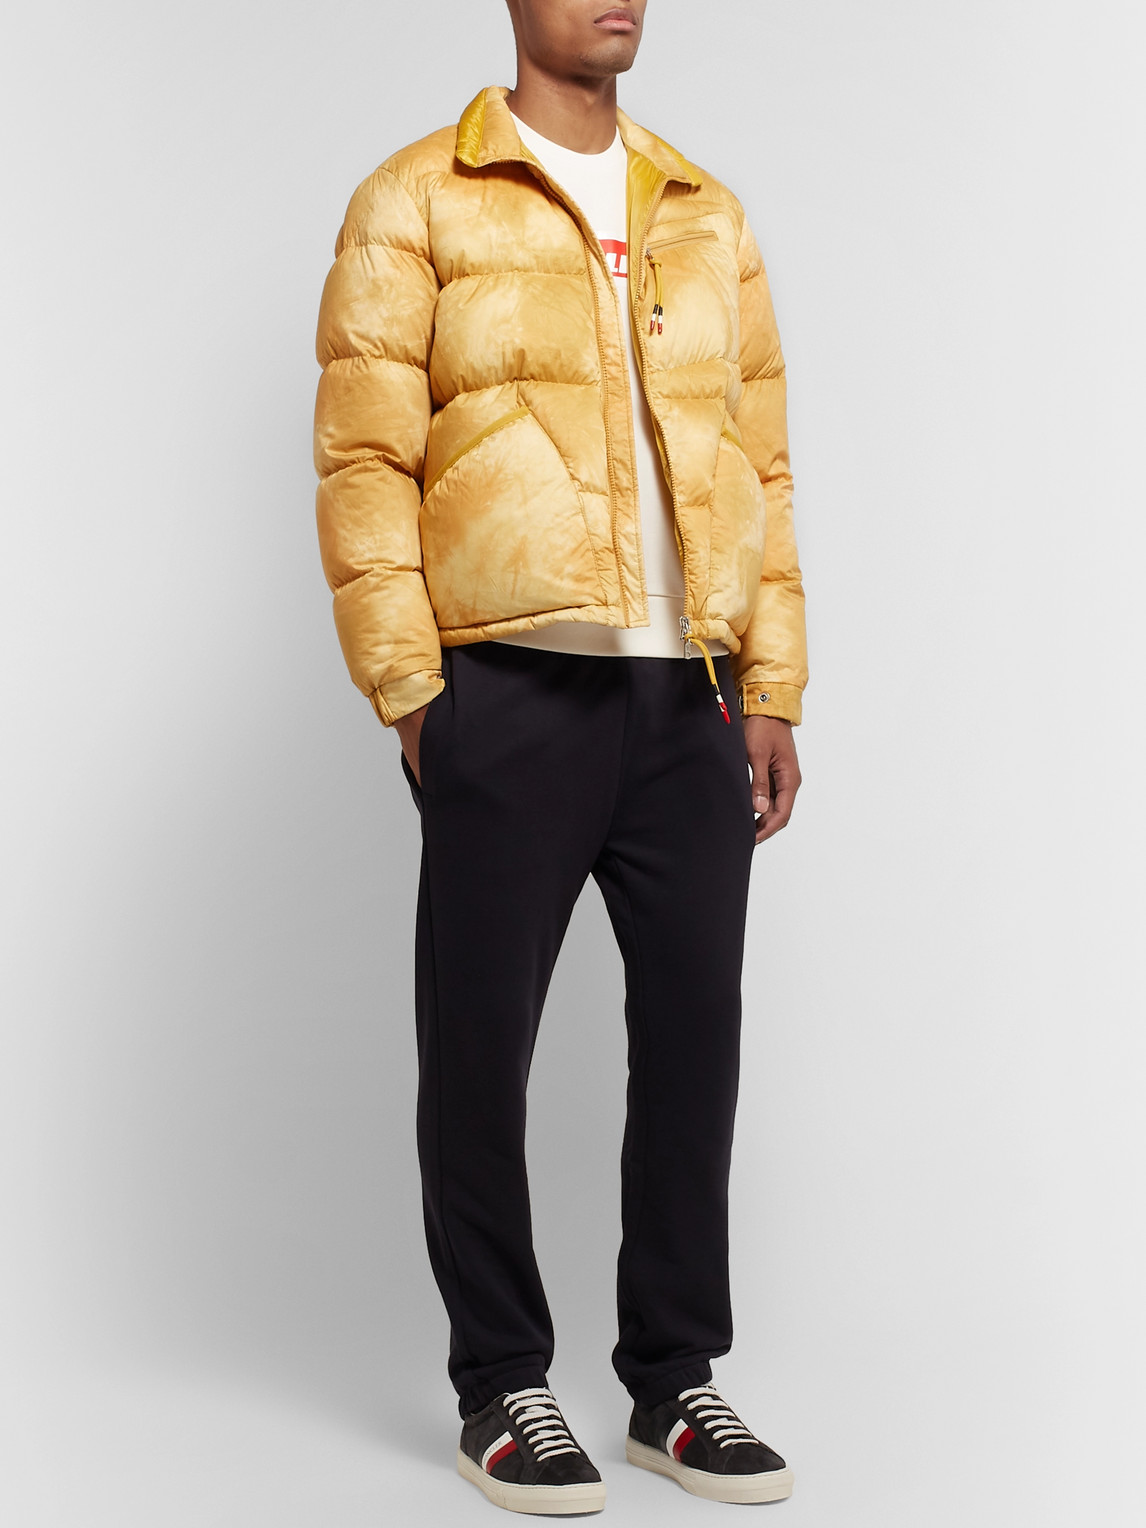 MONCLER GENIUS 2 1952 TIE-DYED QUILTED COTTON DOWN JACKET